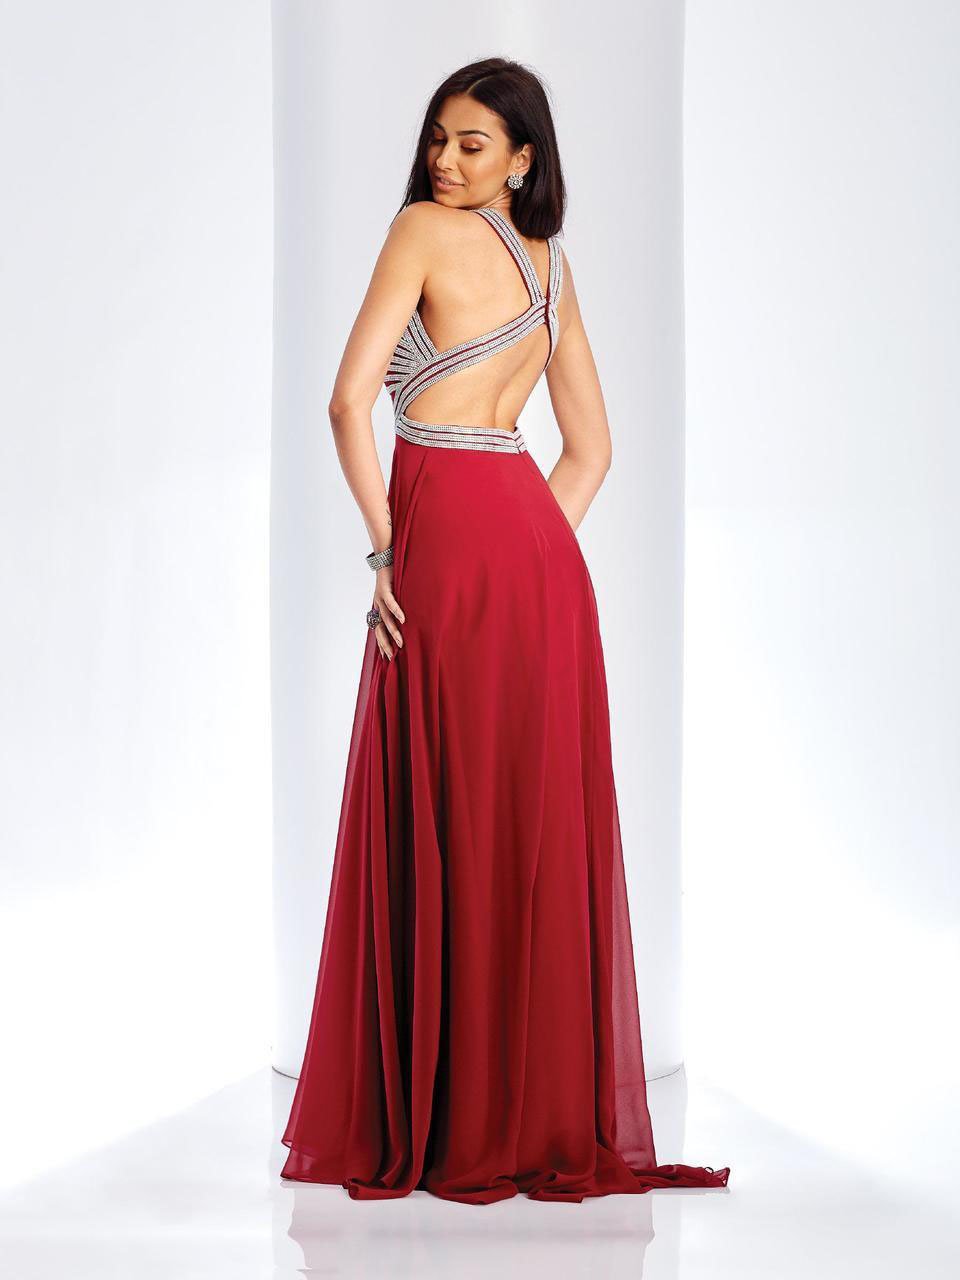 Clarisse - 3412 Illusion Halter A-line Dress in Red